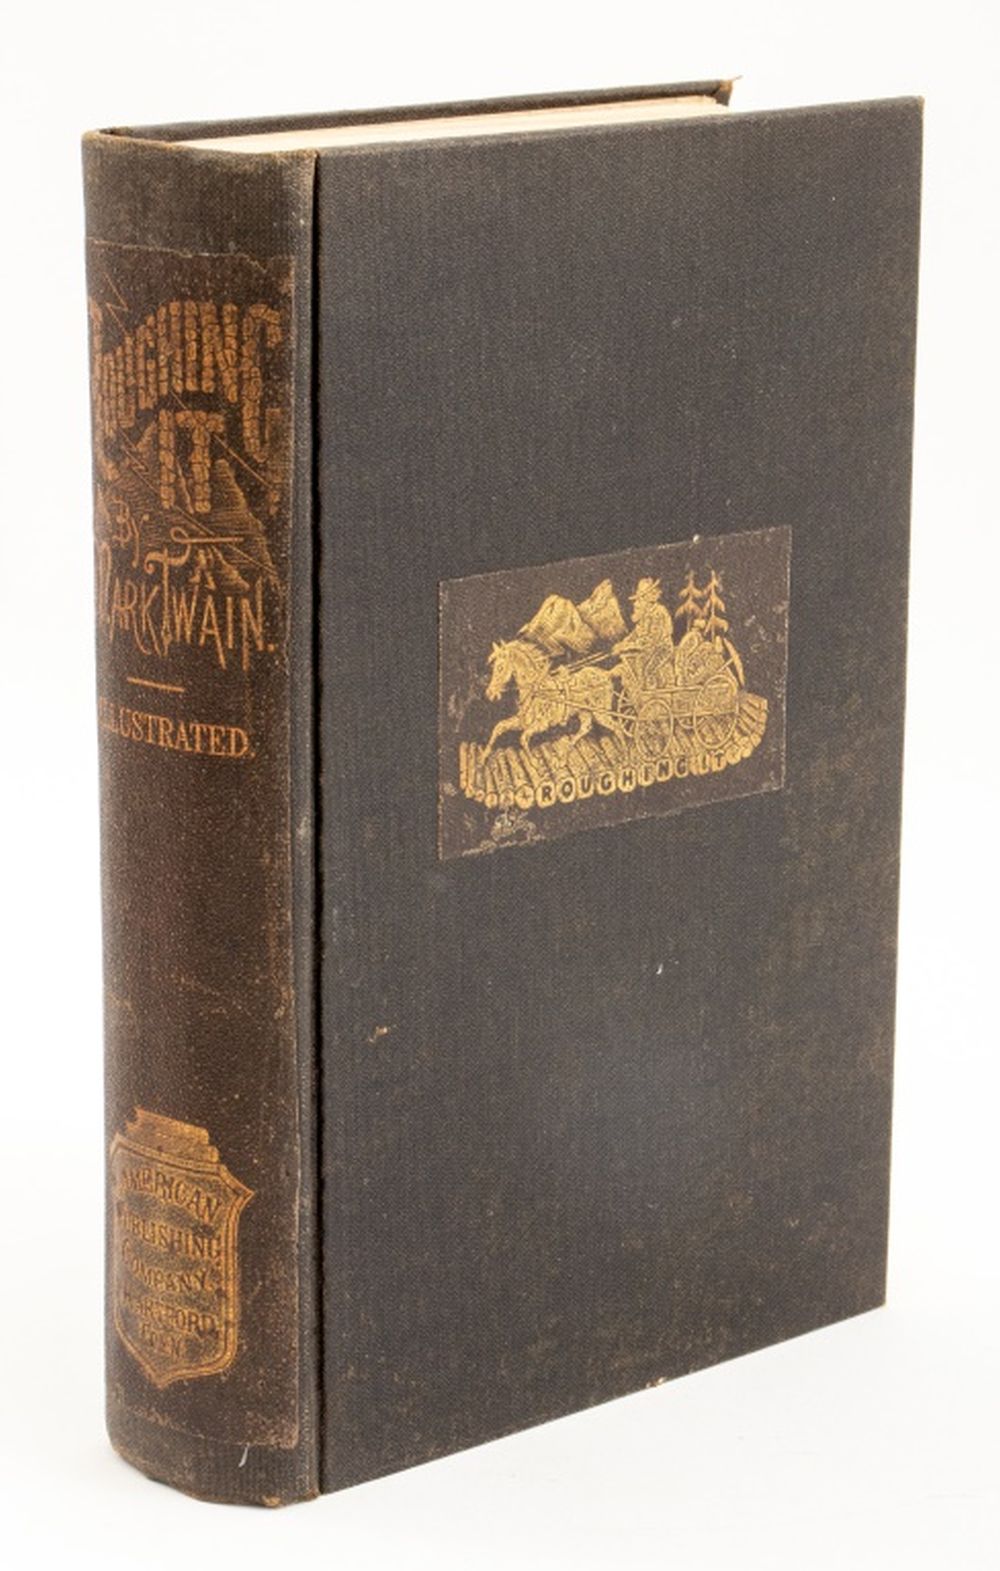 MARK TWAIN ROUGHING IT 1ST EDITION,